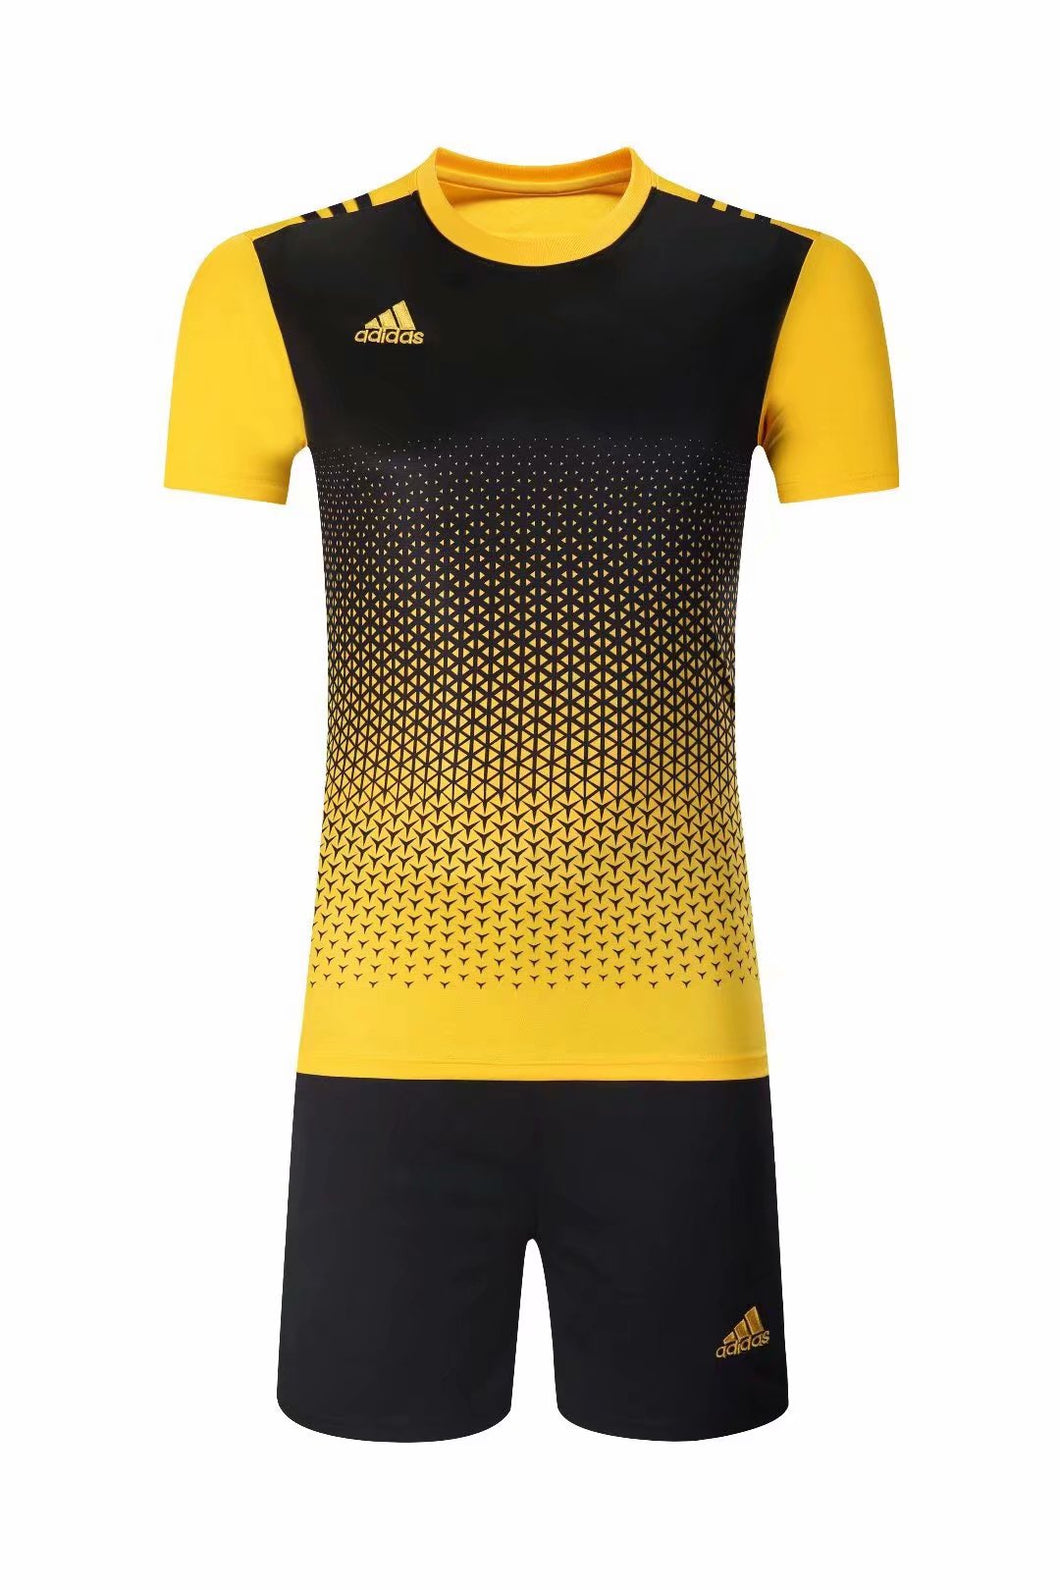 yellow and black football jersey